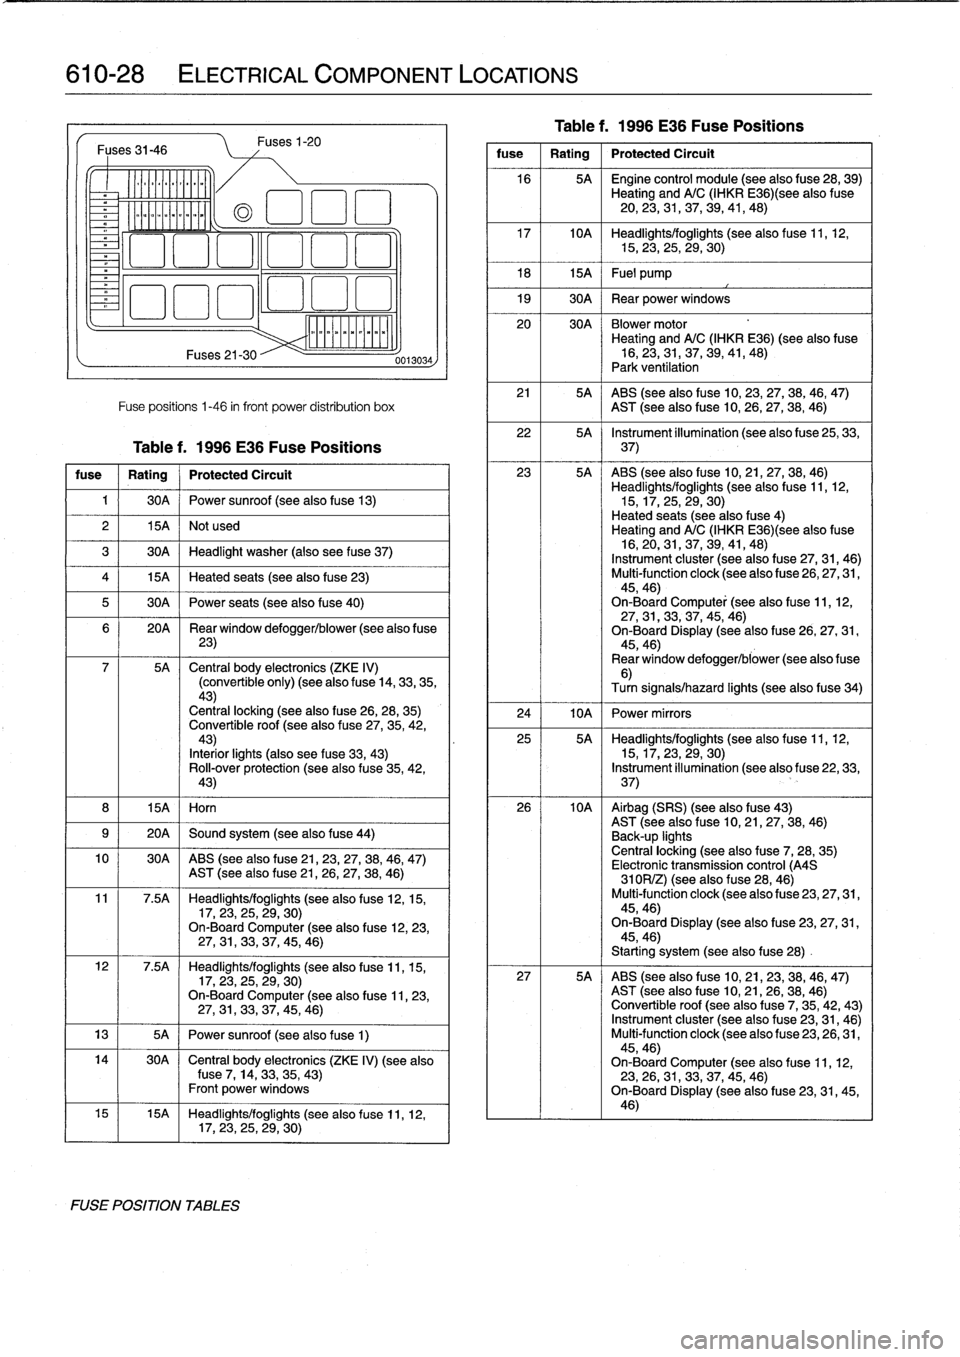 BMW 323i 1995 E36 User Guide 
610-28

	

ELECTRICAL
COMPONENT
LOCATIONS

Fuses
31-46

k
Lírcoo)]
LE

7a
Maz

Fuses
21-30

Fuse
positions
1-46
in
front
power
distribution
box
Table
f
.
1996
E36
Fuse
Positions

fuse

	

Rating

	
